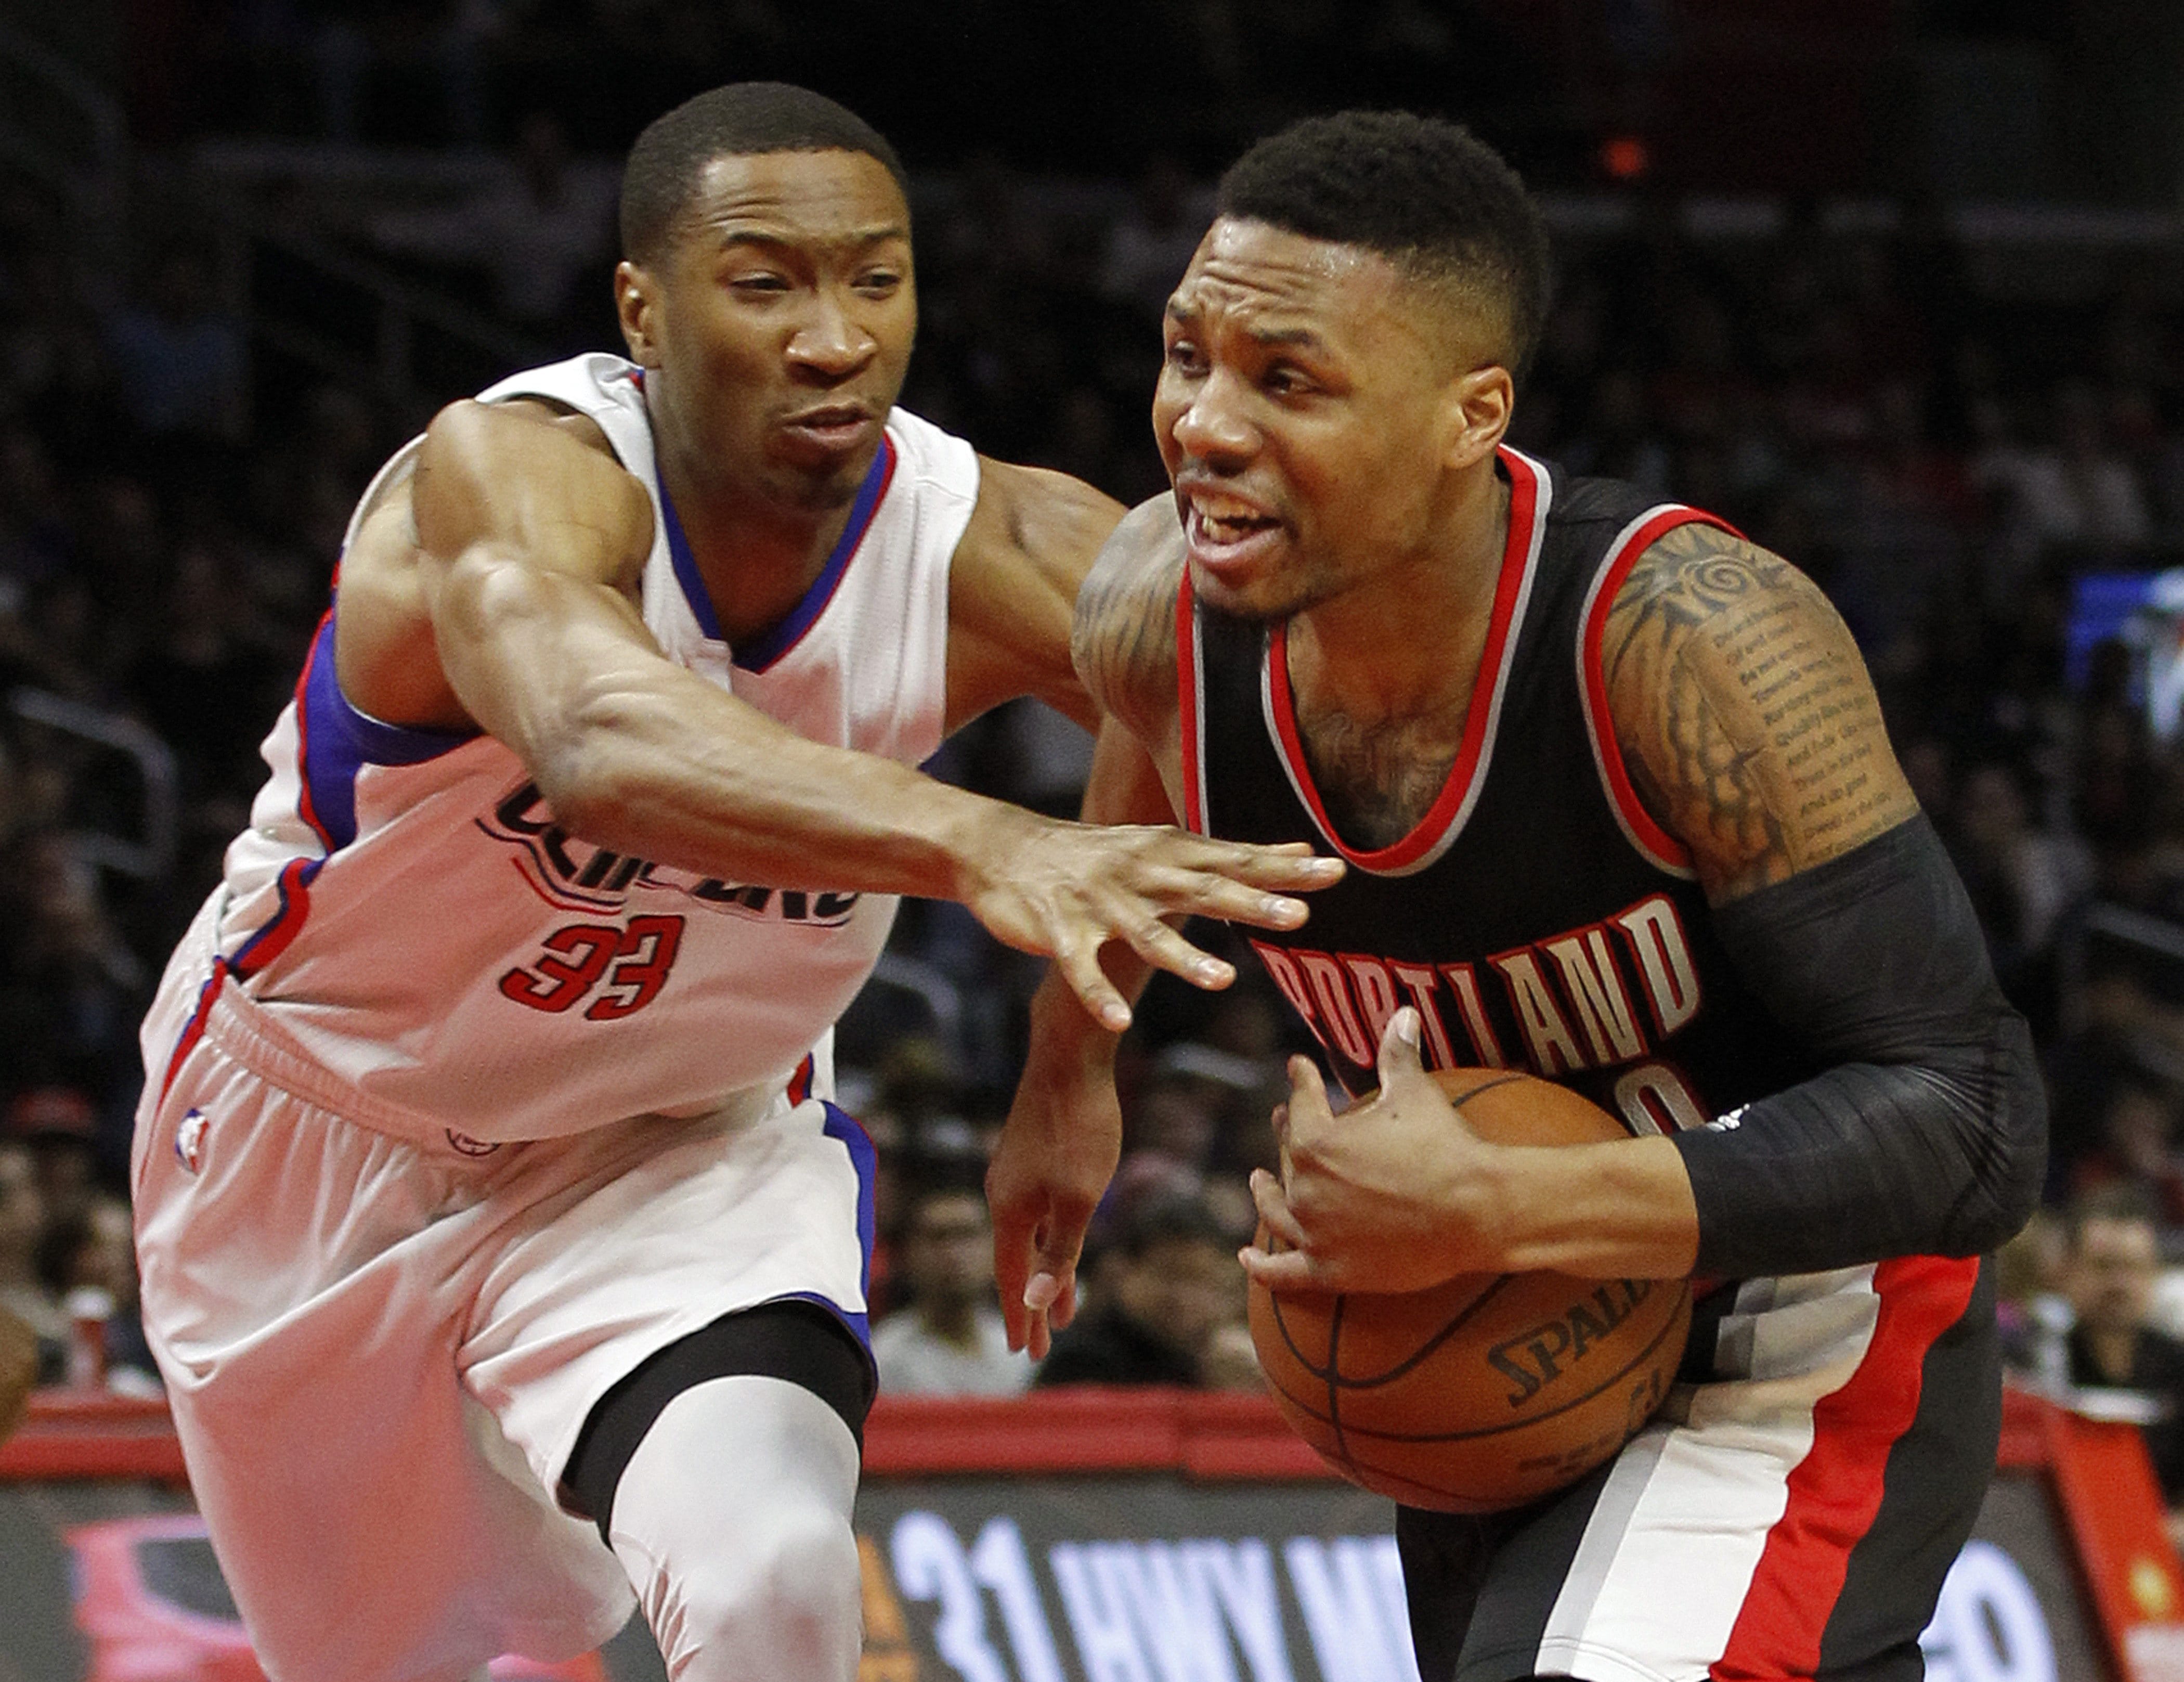 Portland's Damian Lillard, right, drives against Los Angeles Clippers' Wesley Johnson, left, during their game on March 24, 2016. The Clippers won this game 96-94, and could see the Blazers again in the first round of the NBA playoffs.